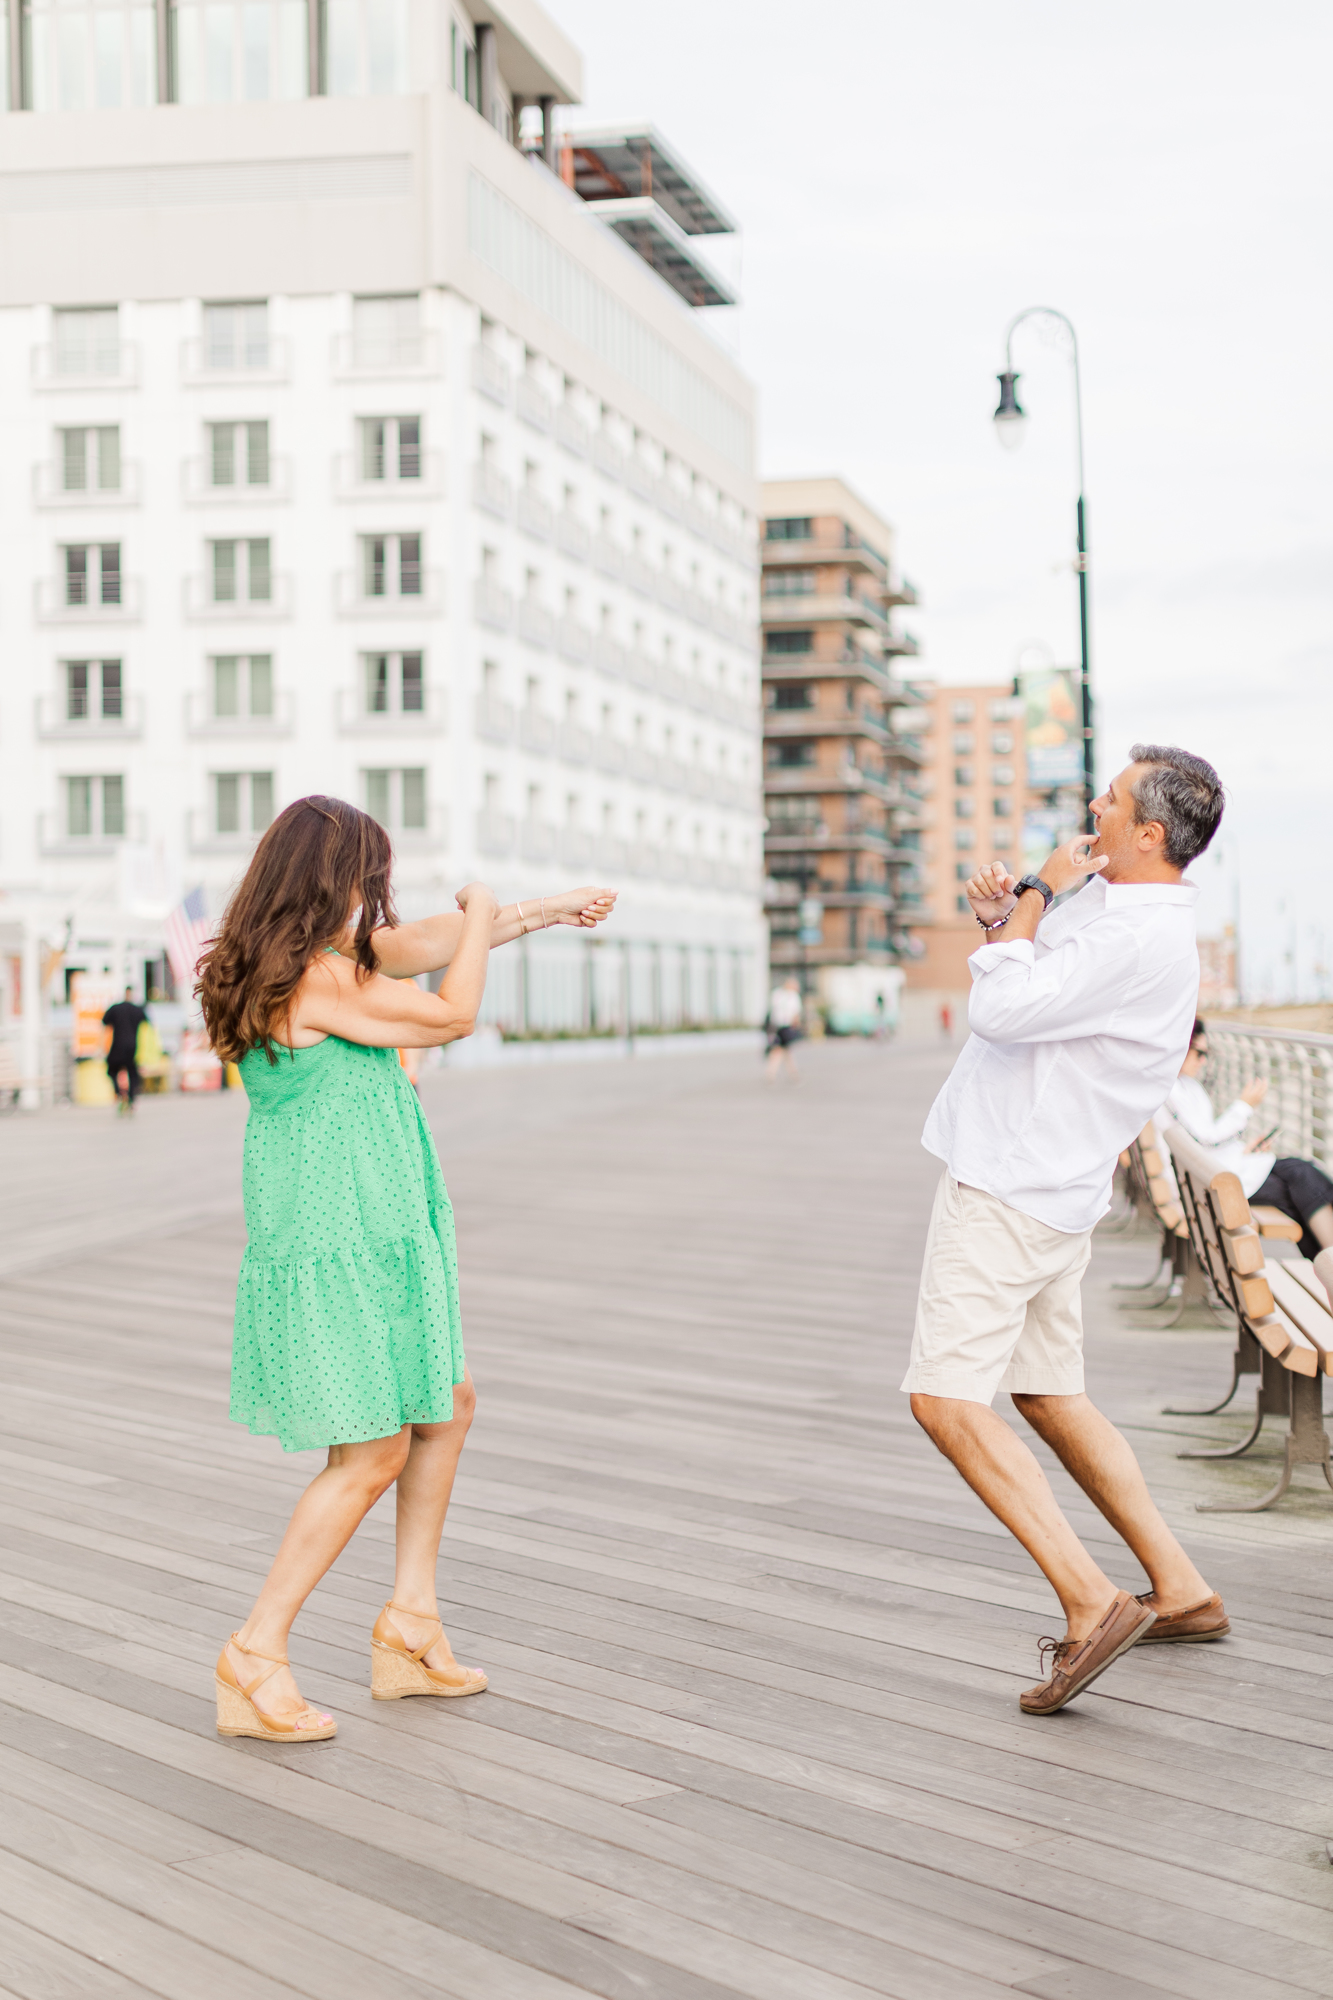 Lively Long Beach Boardwalk Engagement Photography